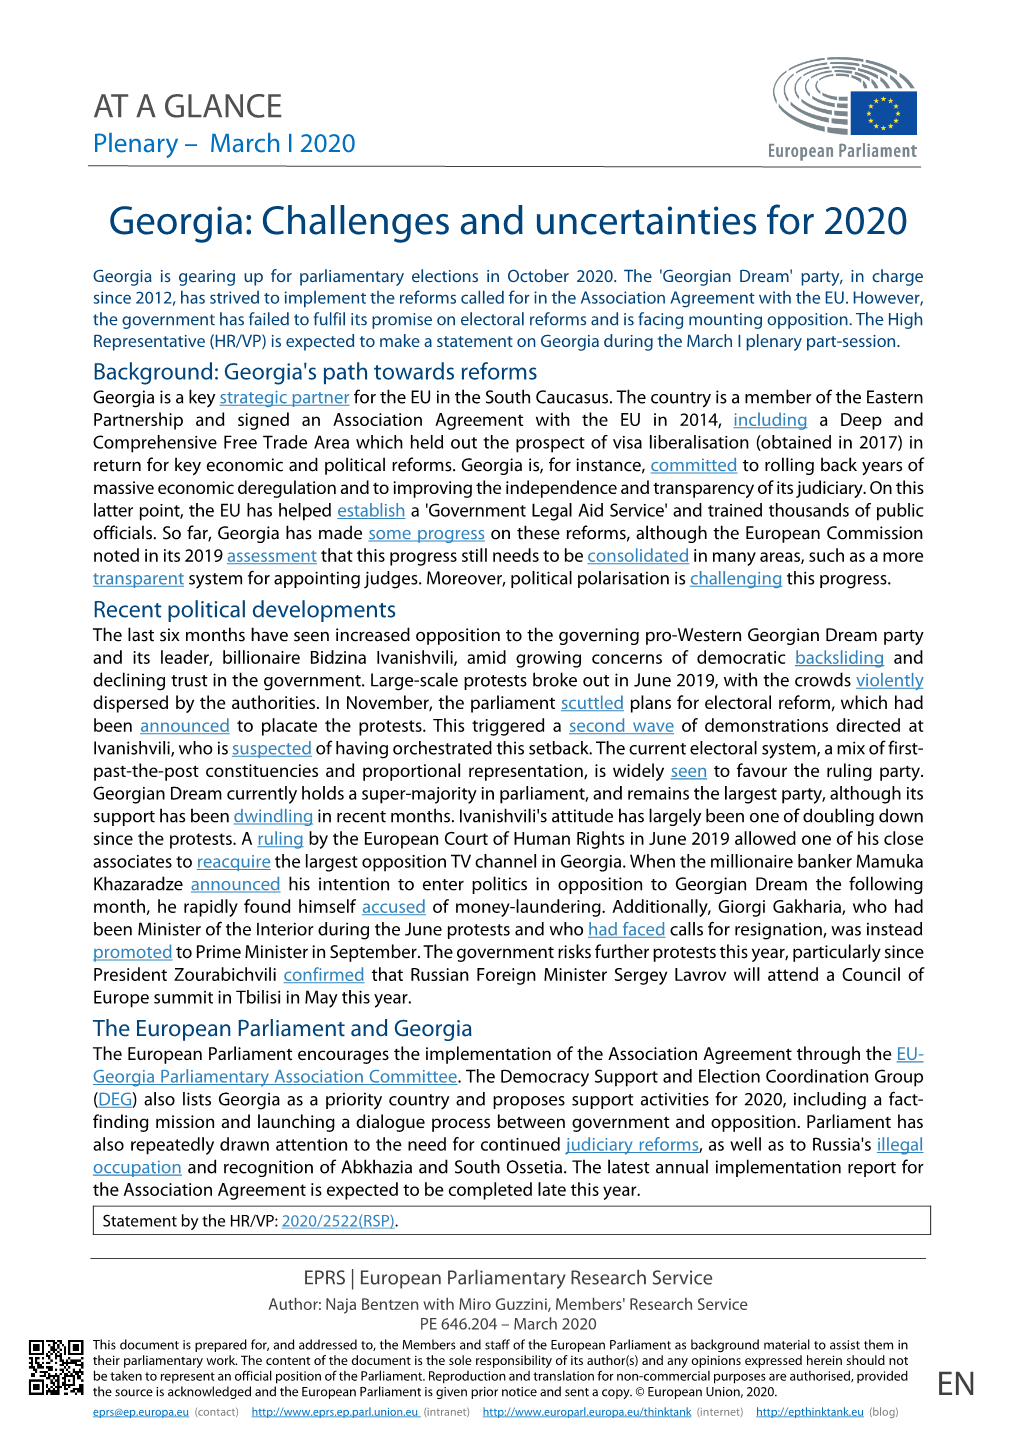 Georgia: Challenges and Uncertainties for 2020